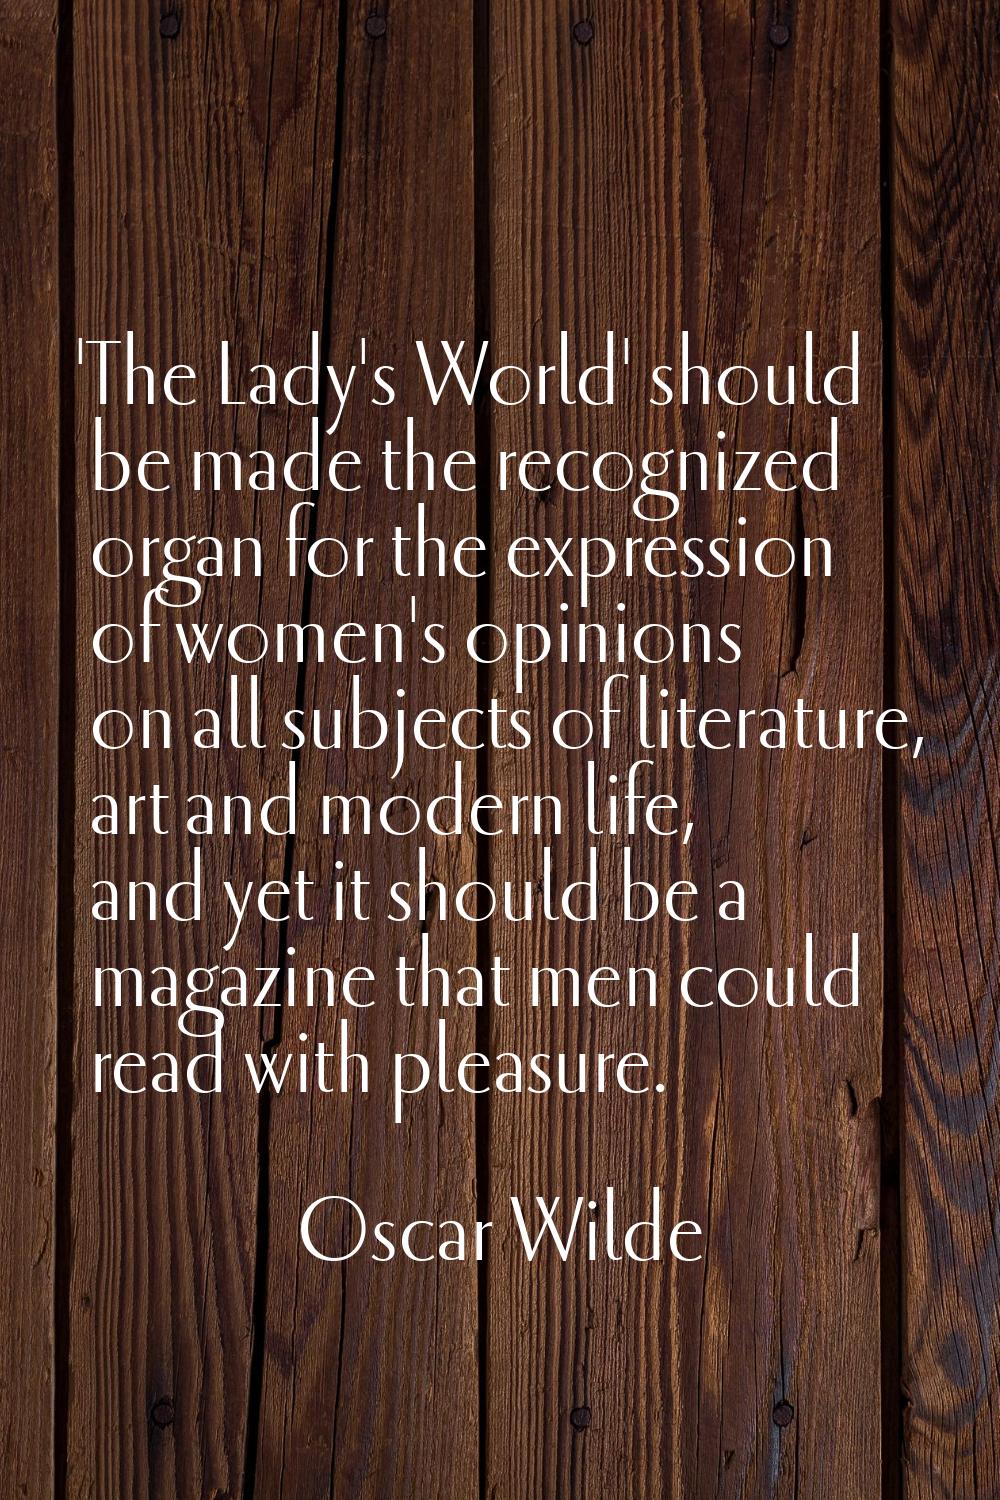 'The Lady's World' should be made the recognized organ for the expression of women's opinions on al